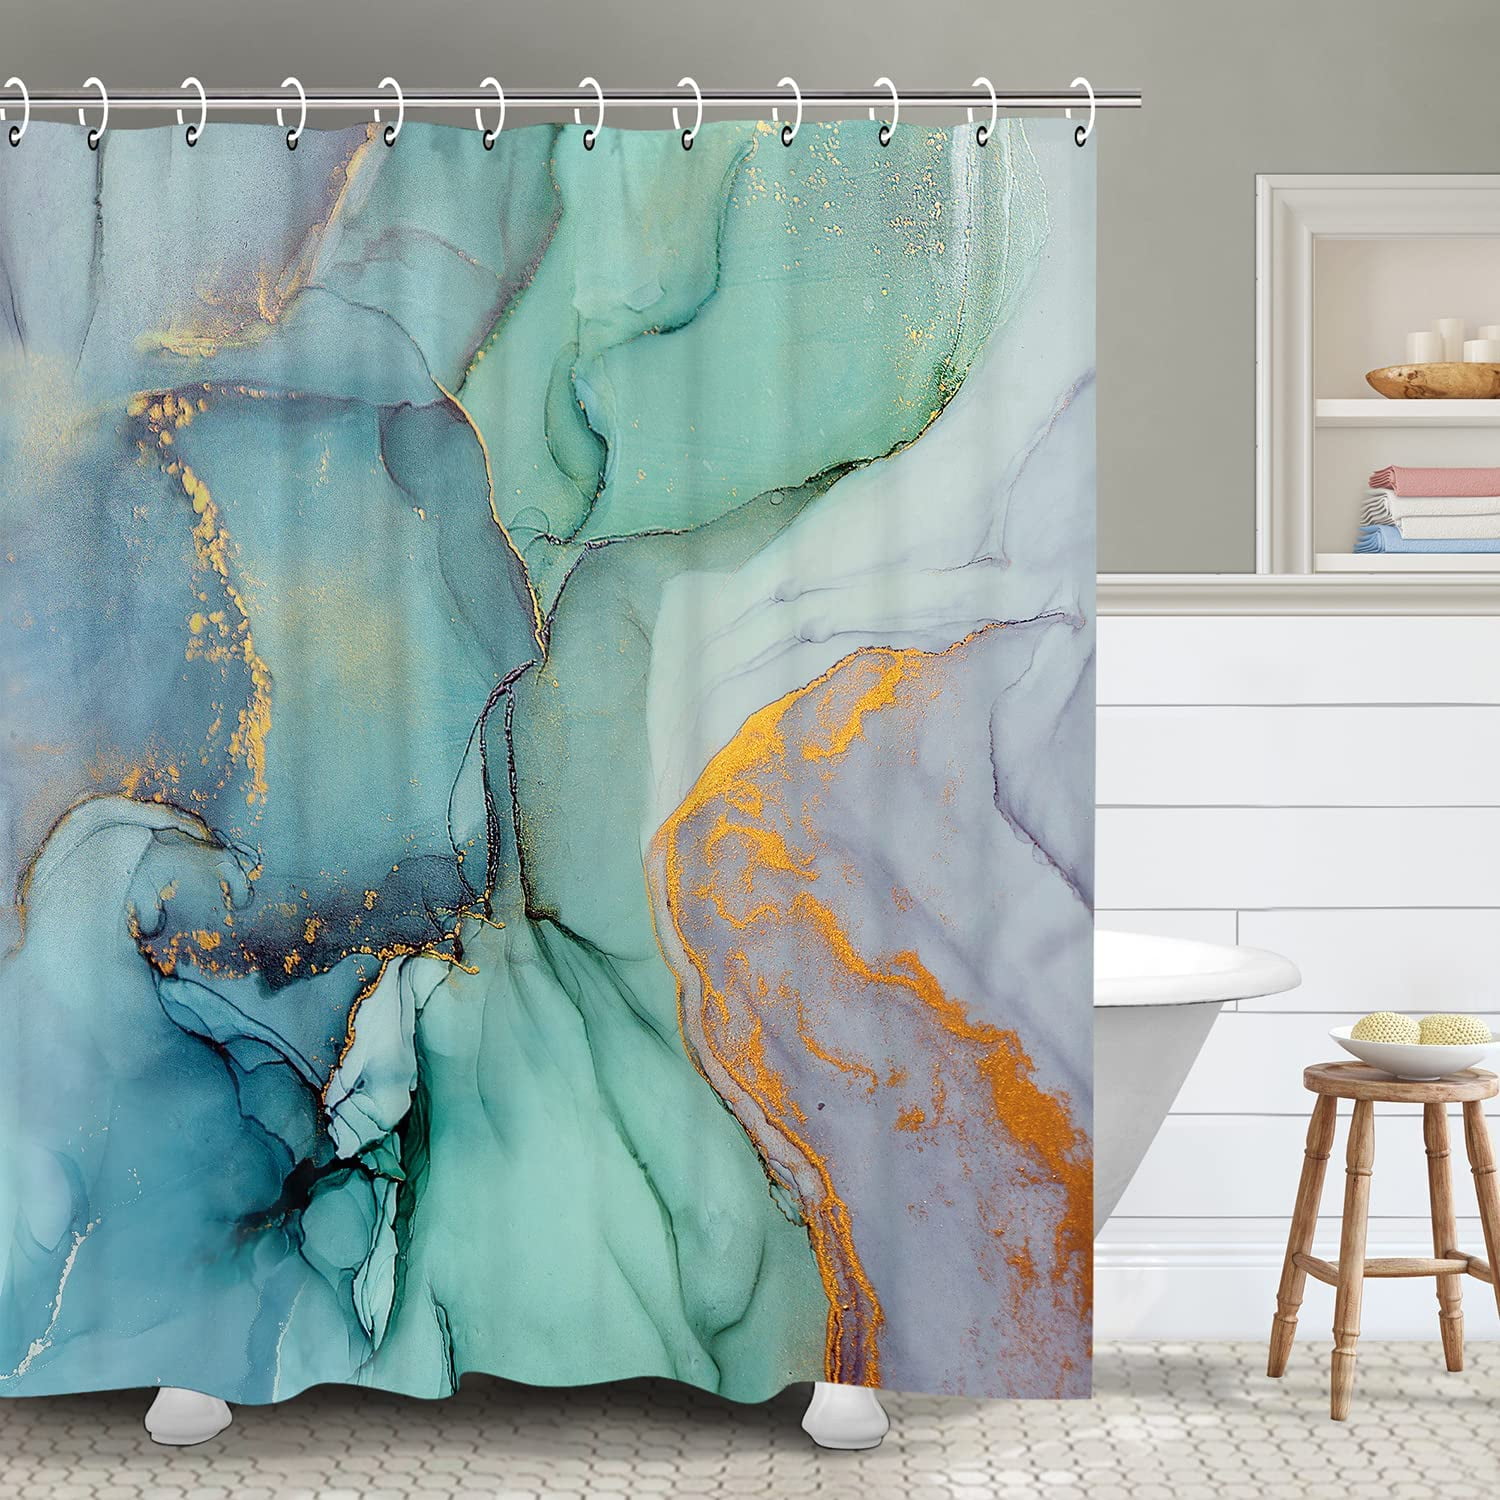 Details about   Sea World Animal Waterproof Polyester Fabric Bathroom Shower Curtain Art Decor 